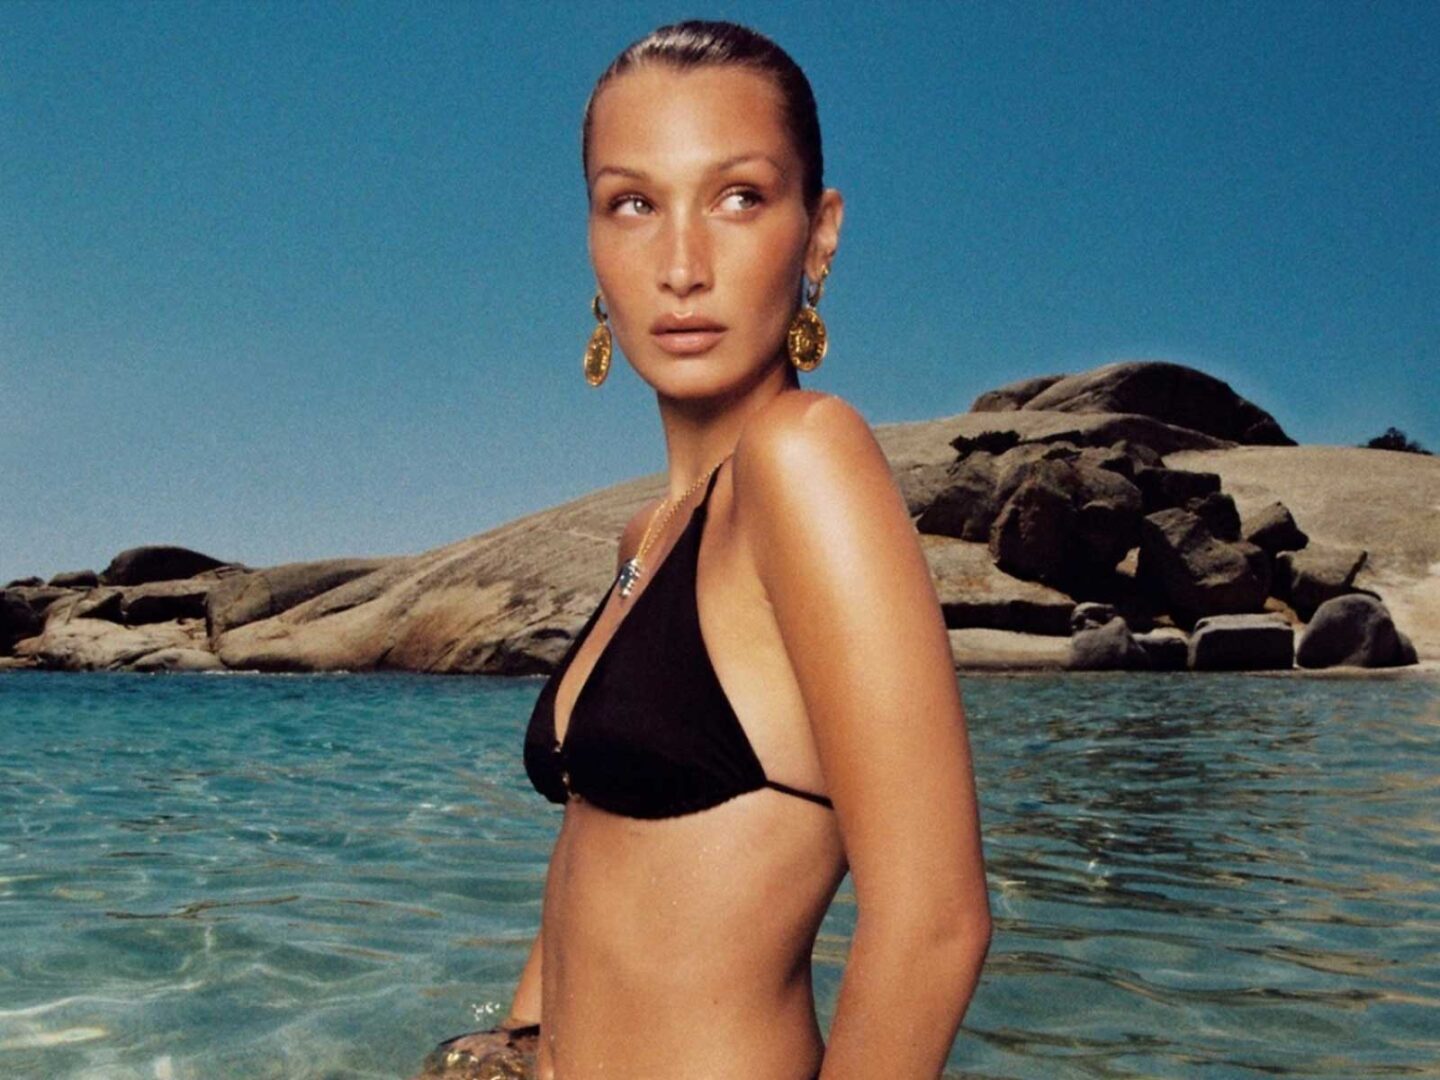 The best self-tanning products for this season